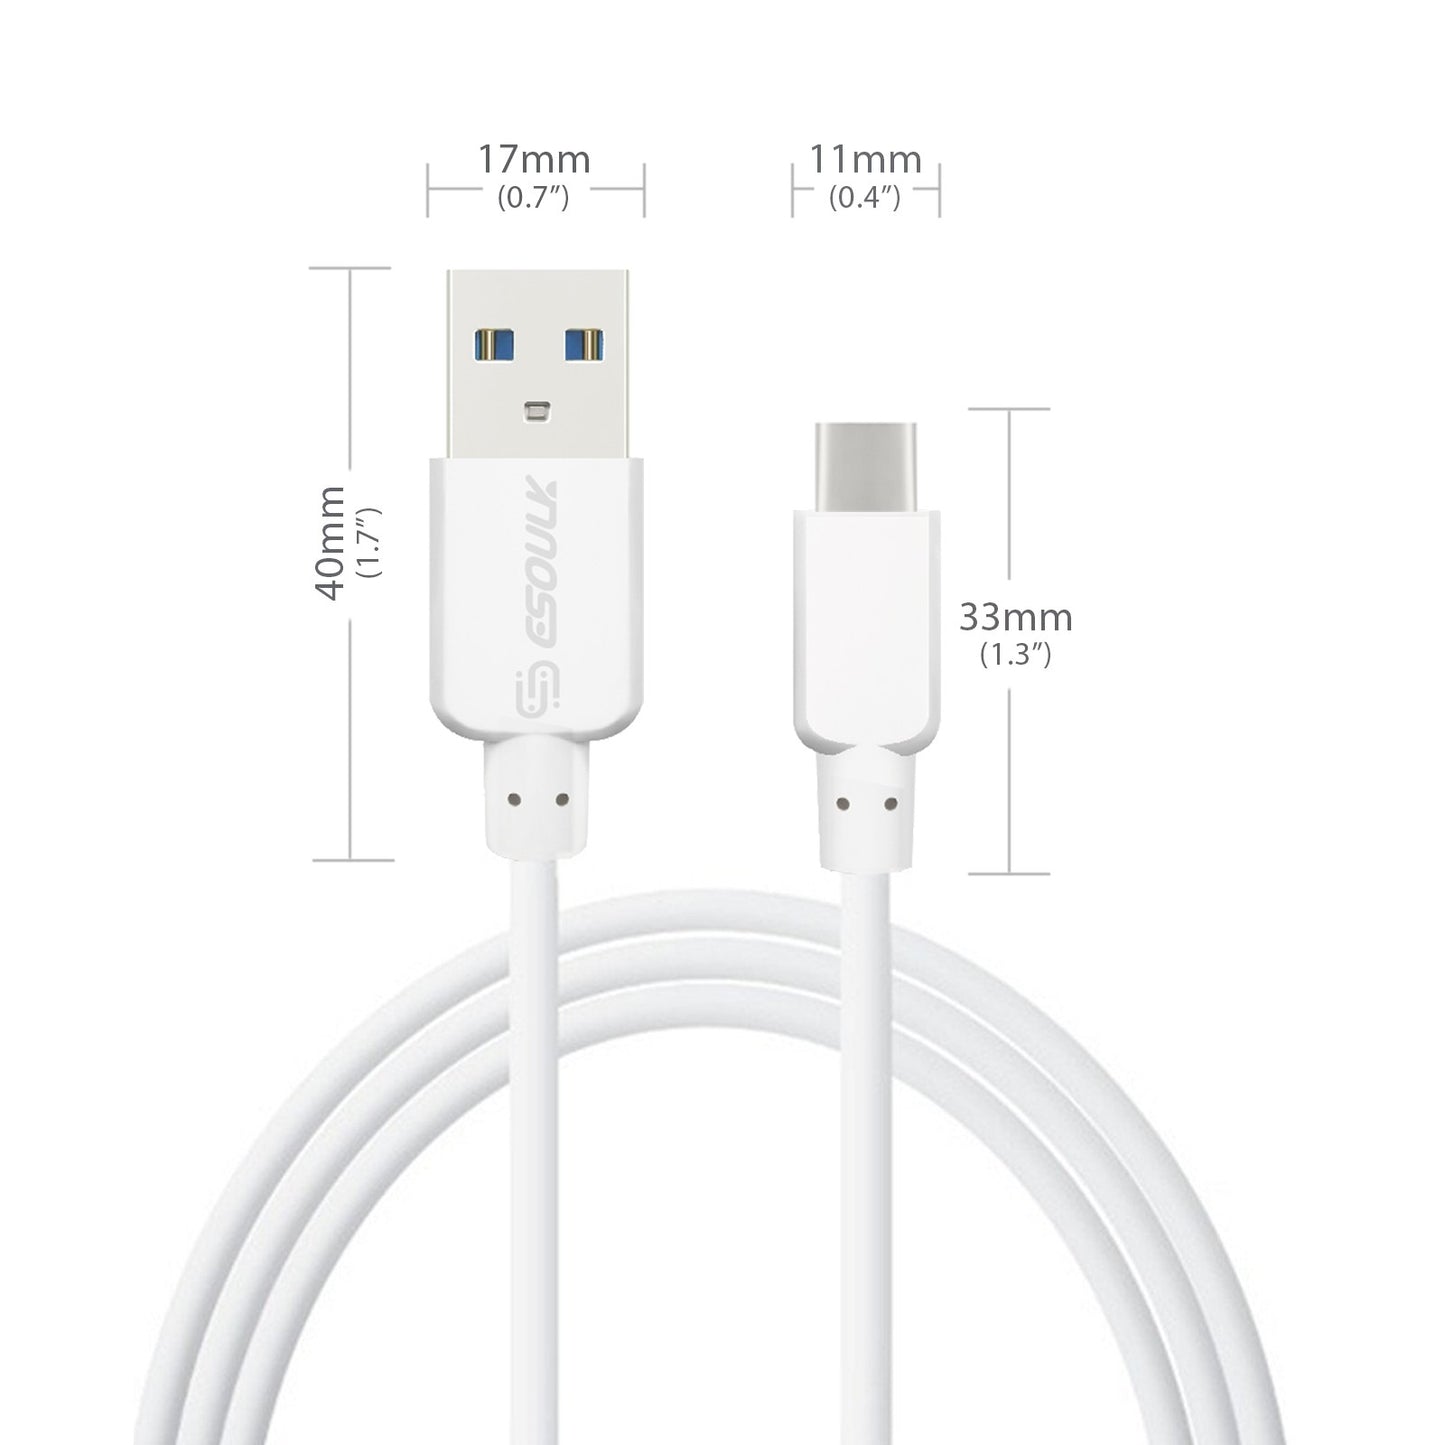 ESOULK 10FT Heavy Duty USB Cable 2A For Type-C White